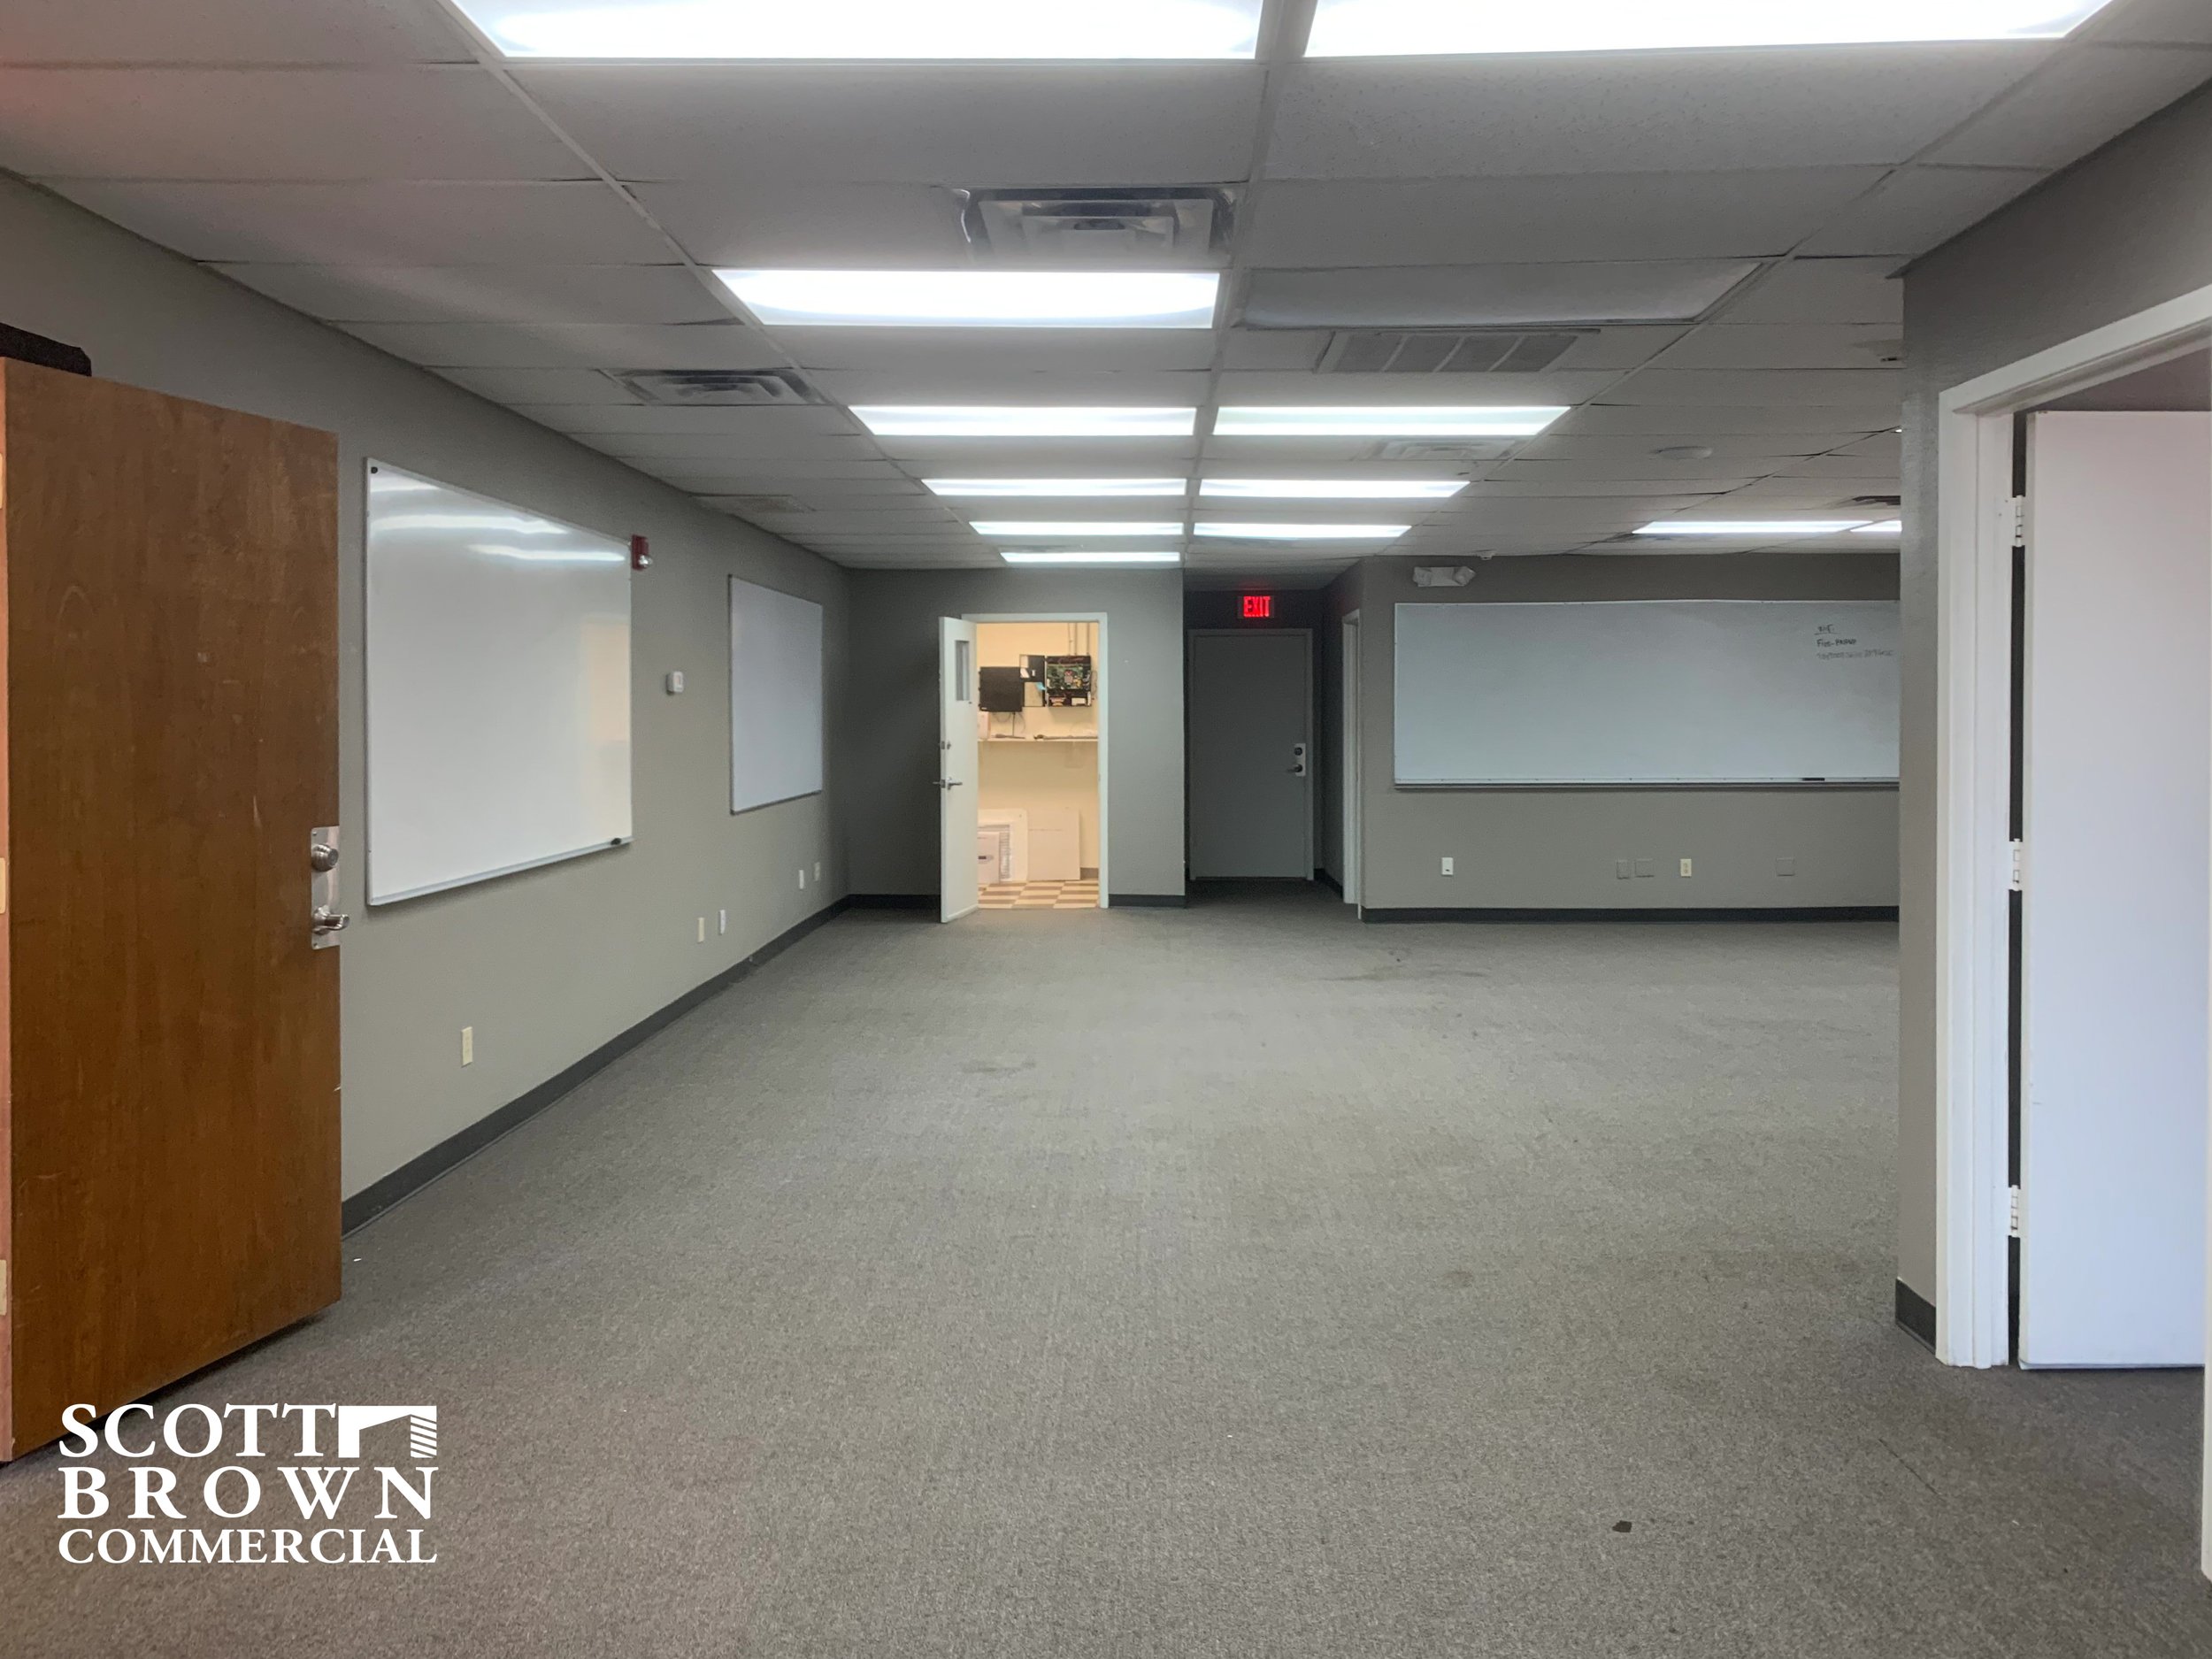  large open office space with grey walls in 400 S Carroll Boulevard 